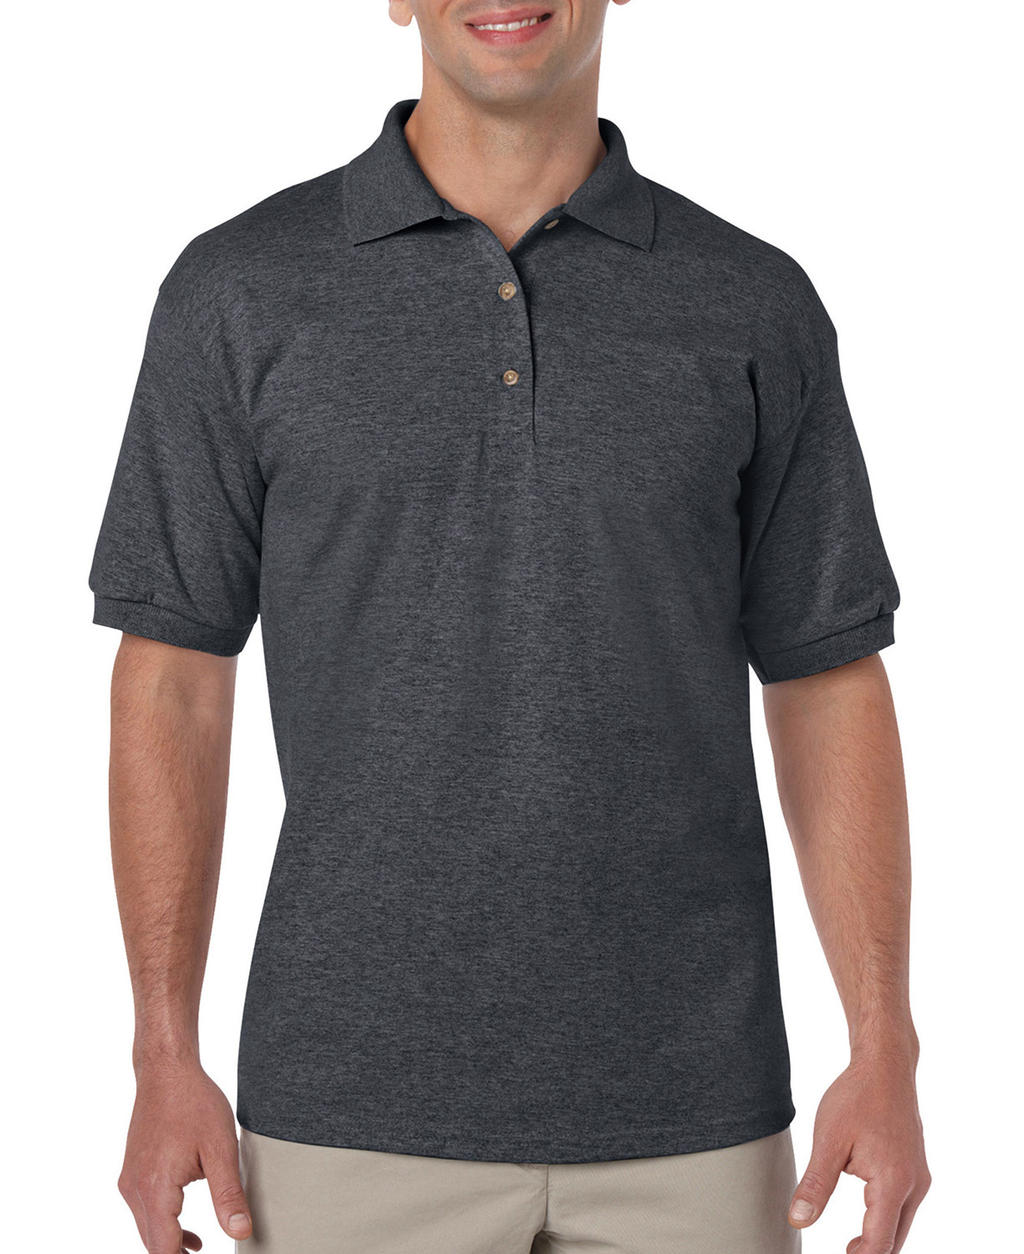  DryBlend Adult Jersey Polo in Farbe Dark Heather